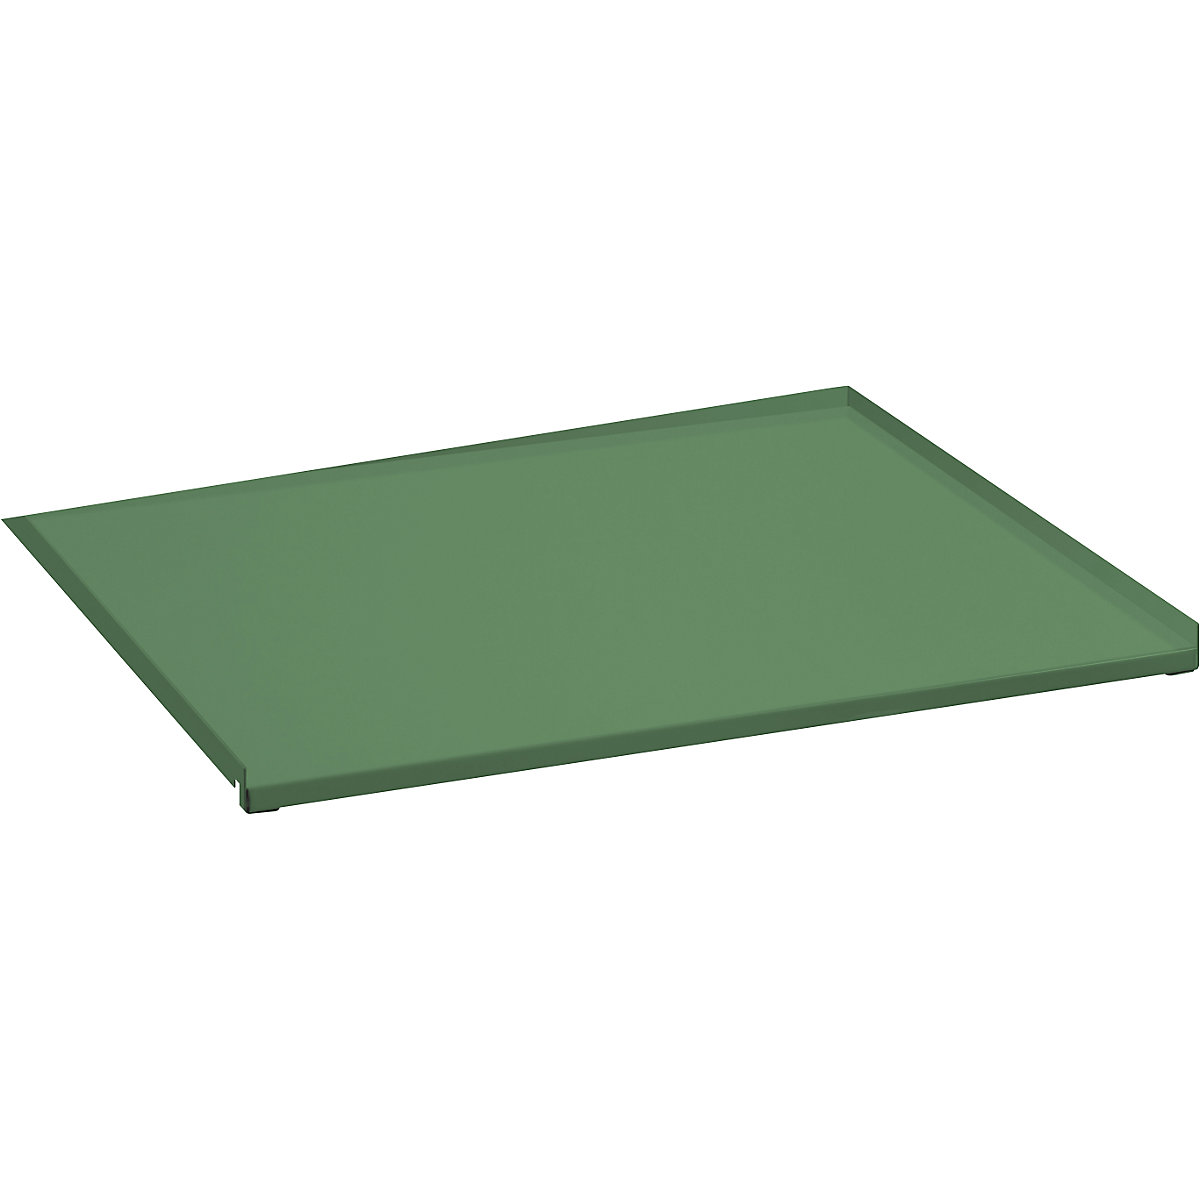 Sheet metal cover for extension frame – LISTA, partial extension, for WxD 890 x 860 mm, reseda green